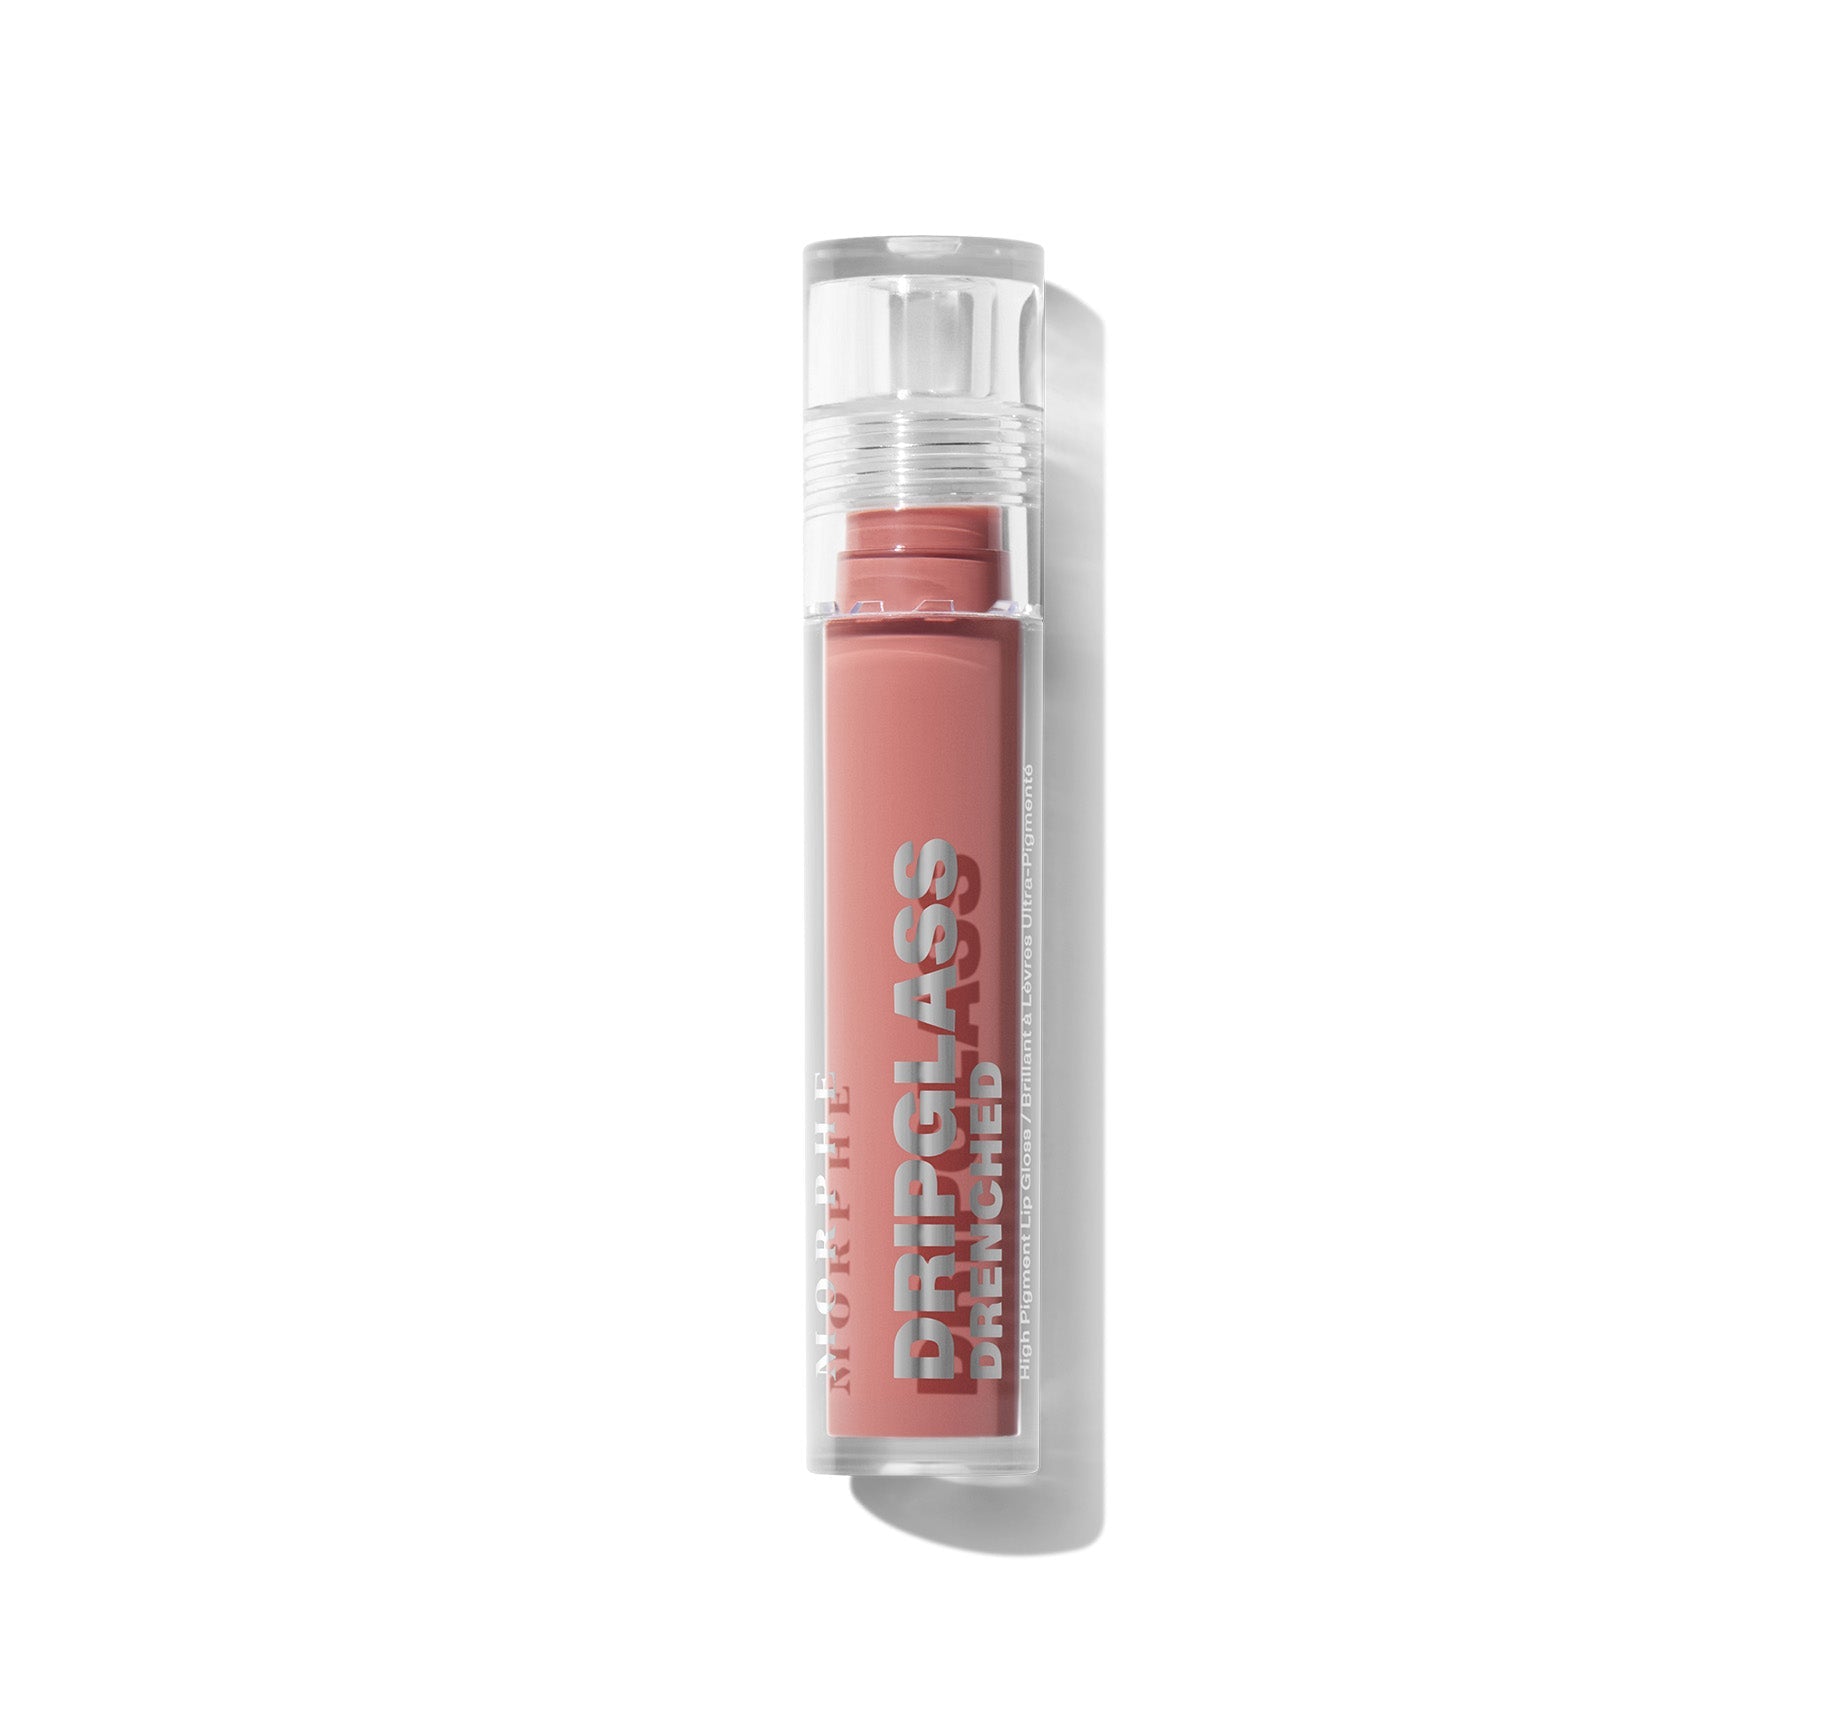 Dripglass Drenched High Pigment Lip Gloss - Wet Peach - Image 5